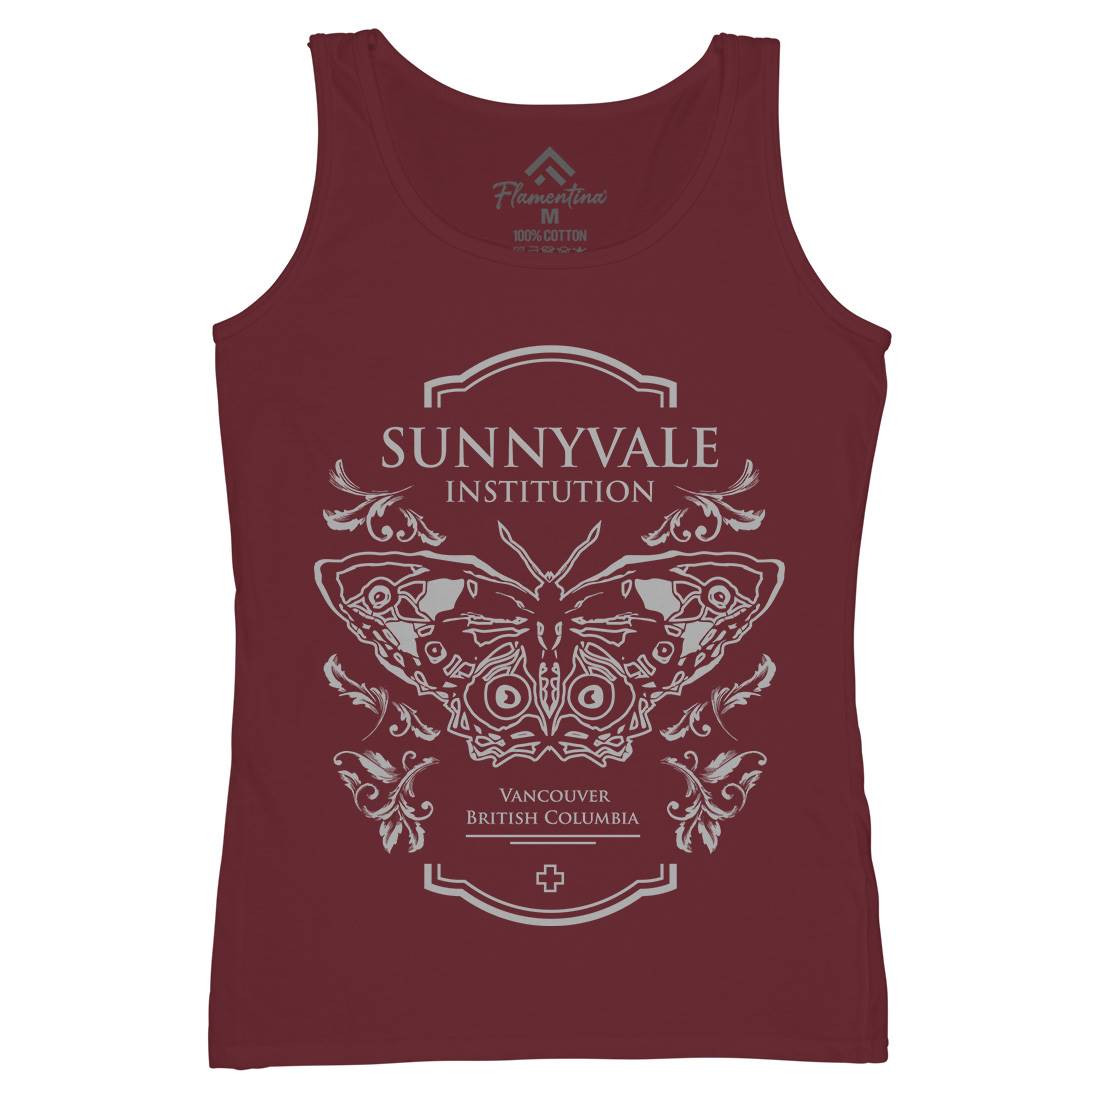 Sunnyvale Institution Womens Organic Tank Top Vest Space D232